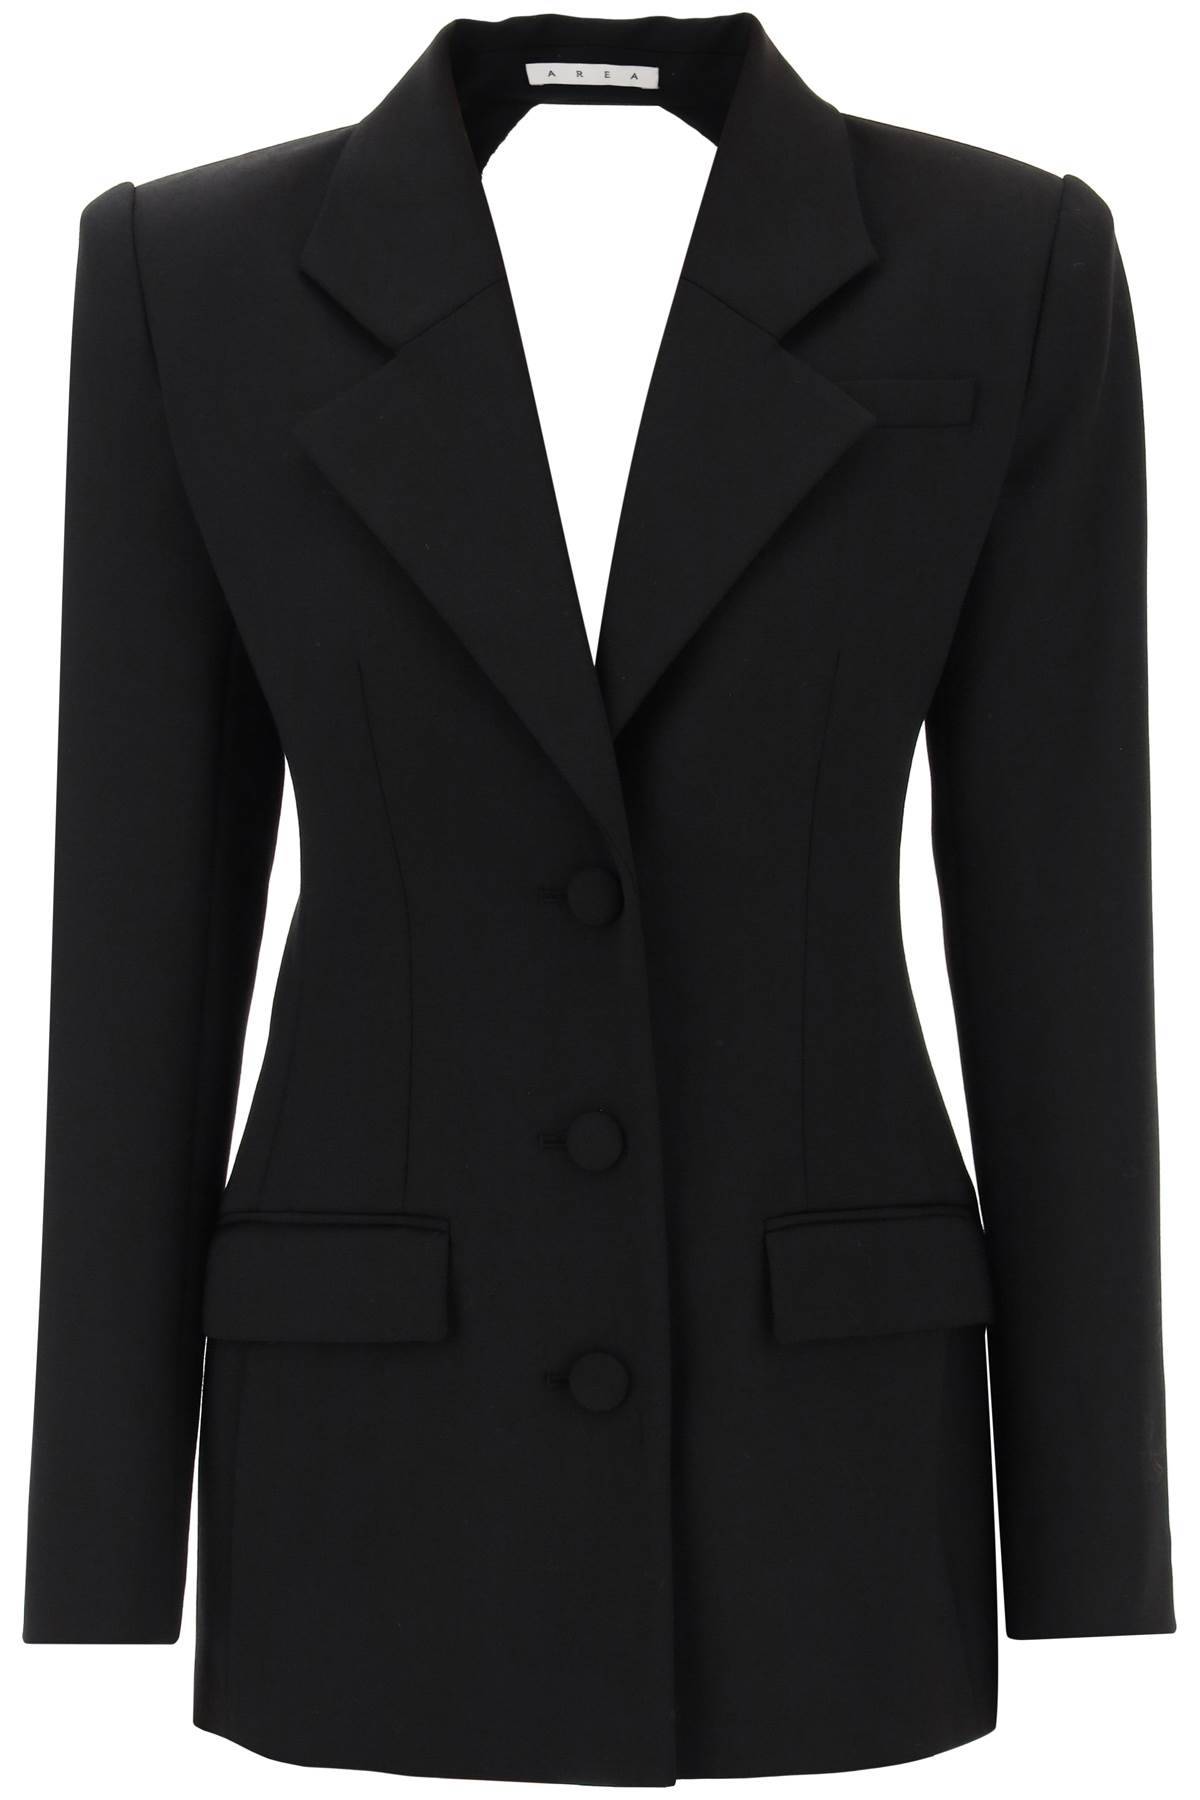 AREA AREA blazer dress with cut-out and crystals